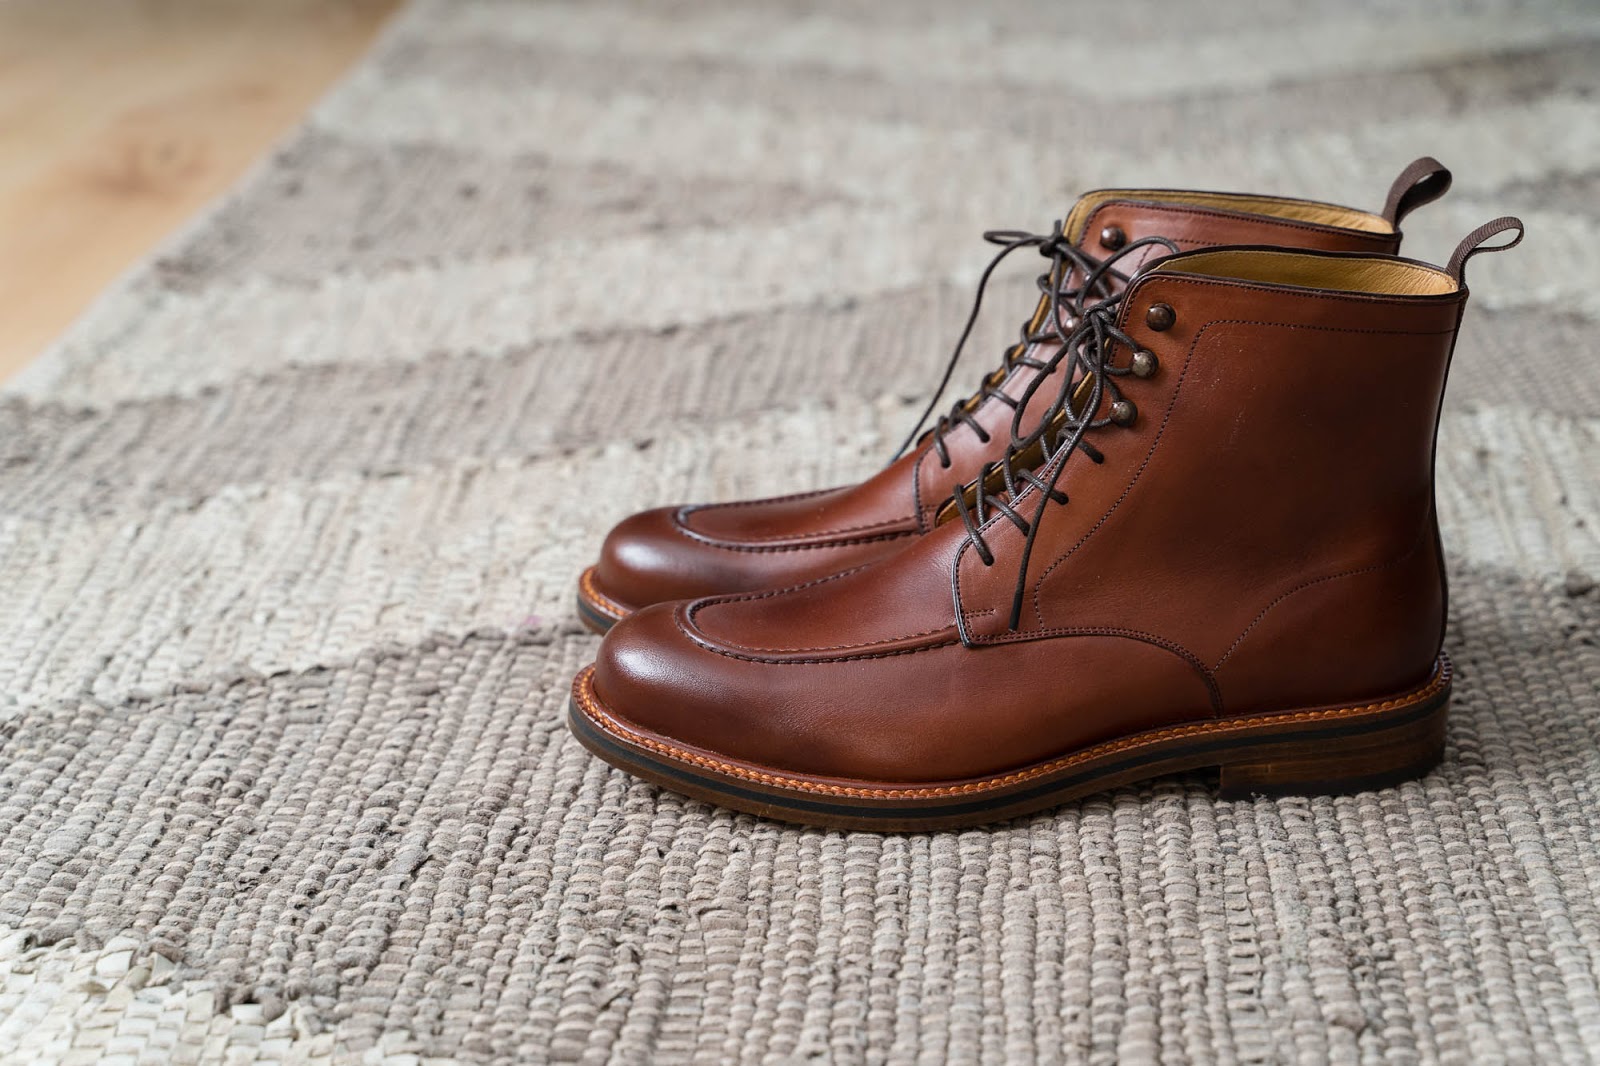 The New Standard - Beckett Simonon Gallagher Boots - First Impressions